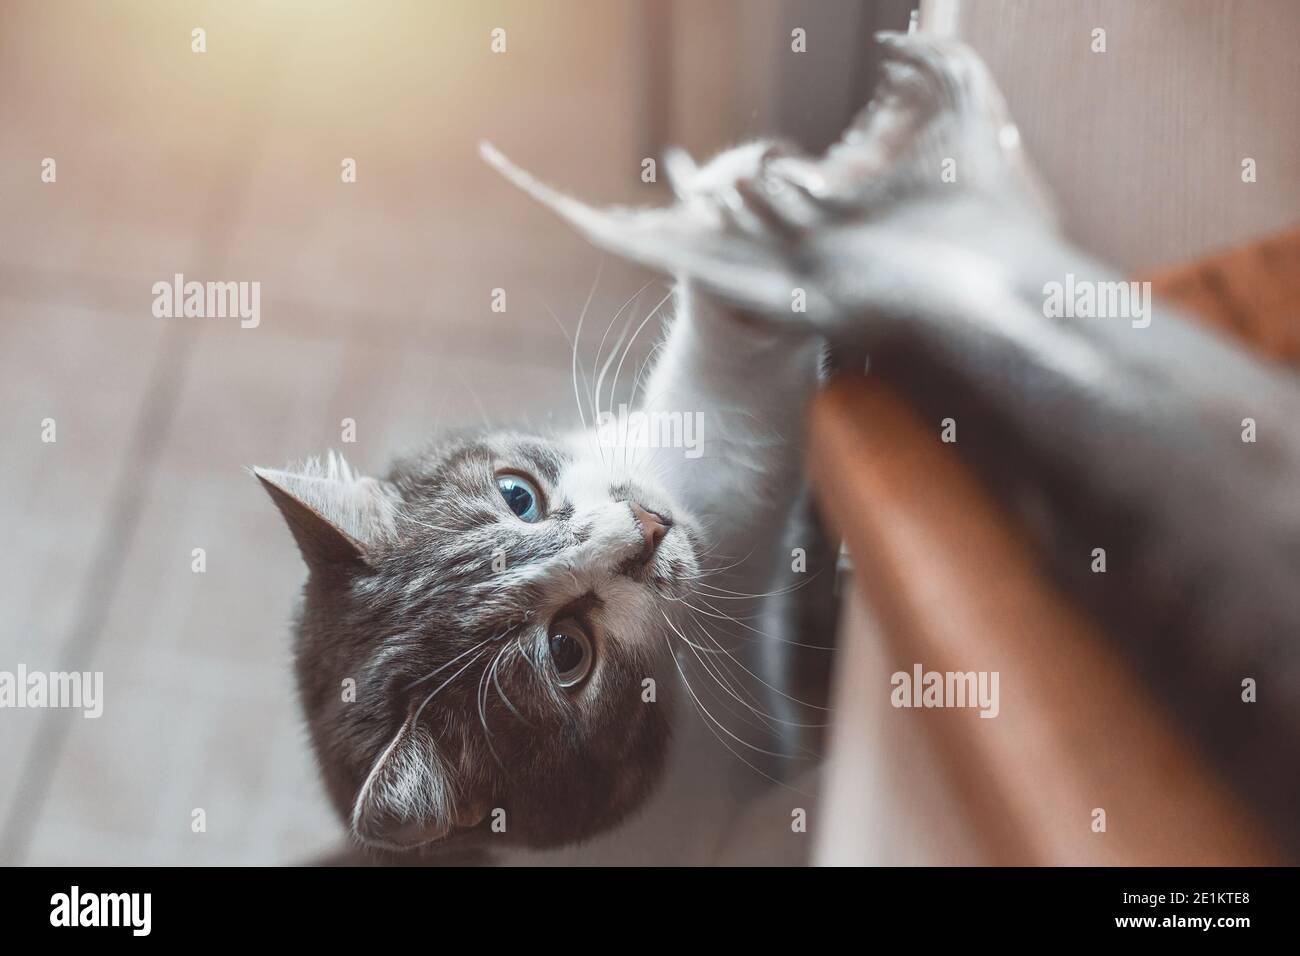 A hungry cat steals fish from the cutting board on the table.  Stock Photo